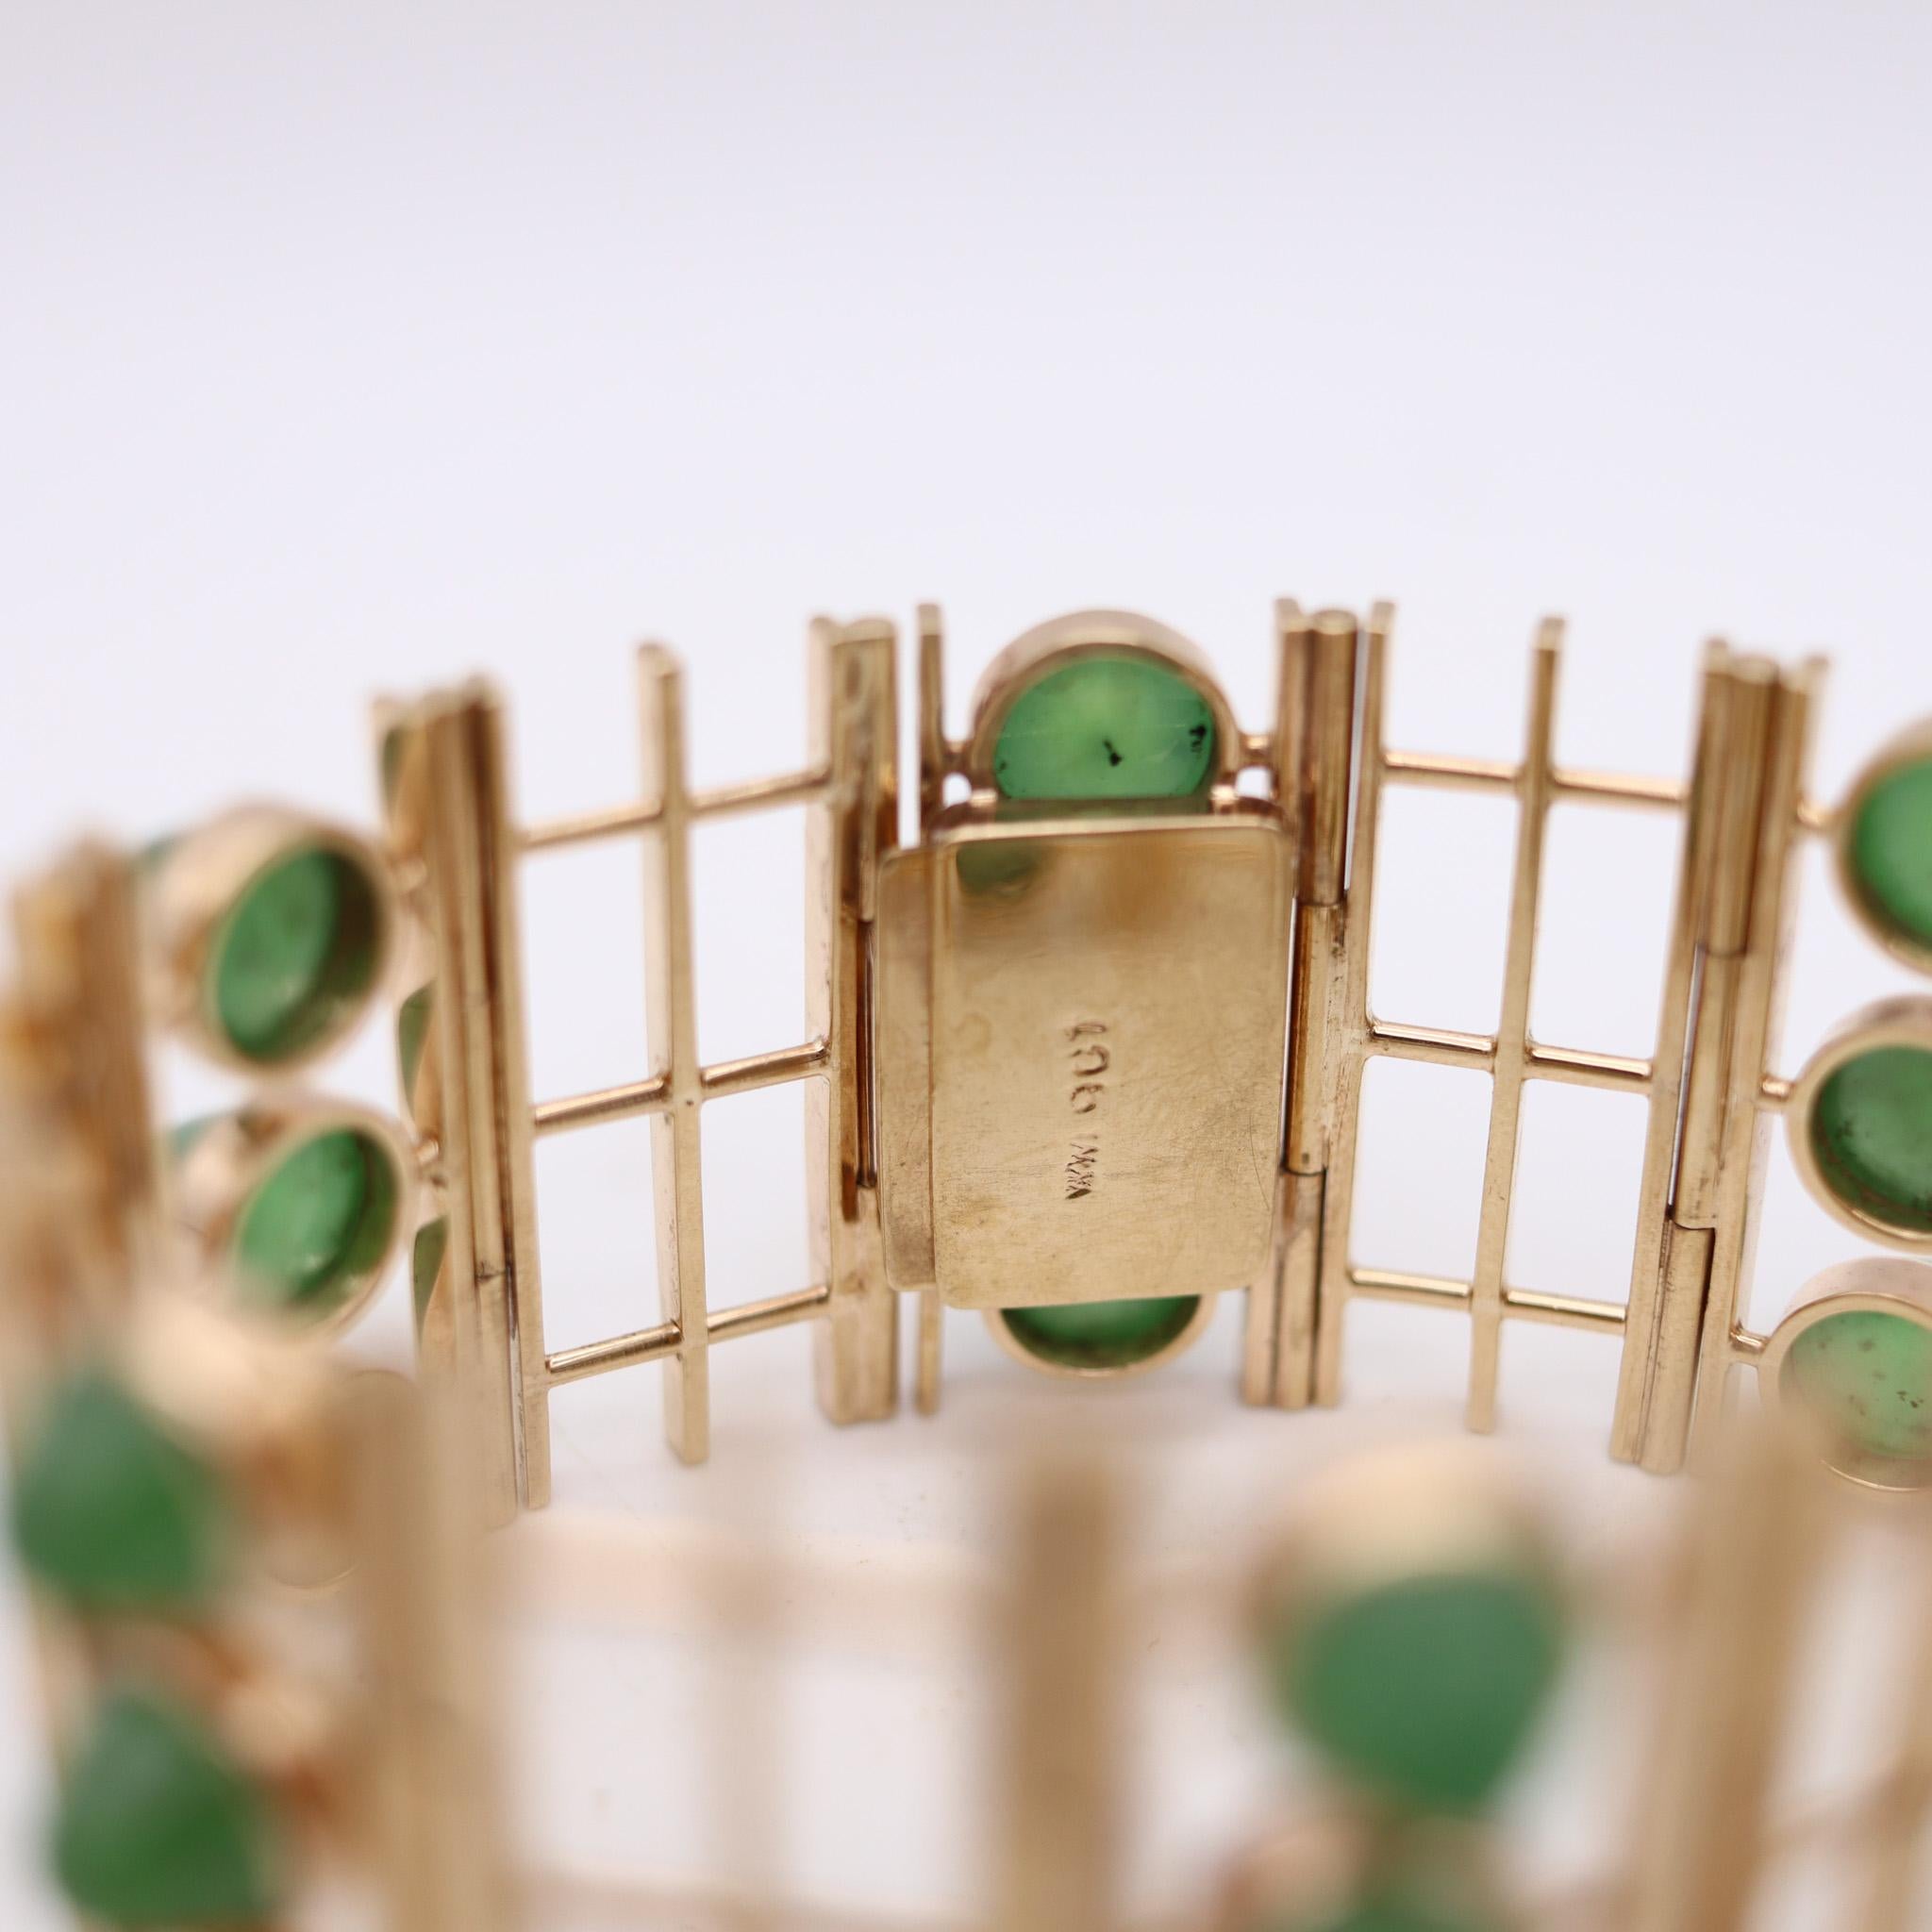 Cabochon England Geometric Modernist Bracelet I 9Kt Gold With 45.18 Ctw In Nephrite Jade For Sale